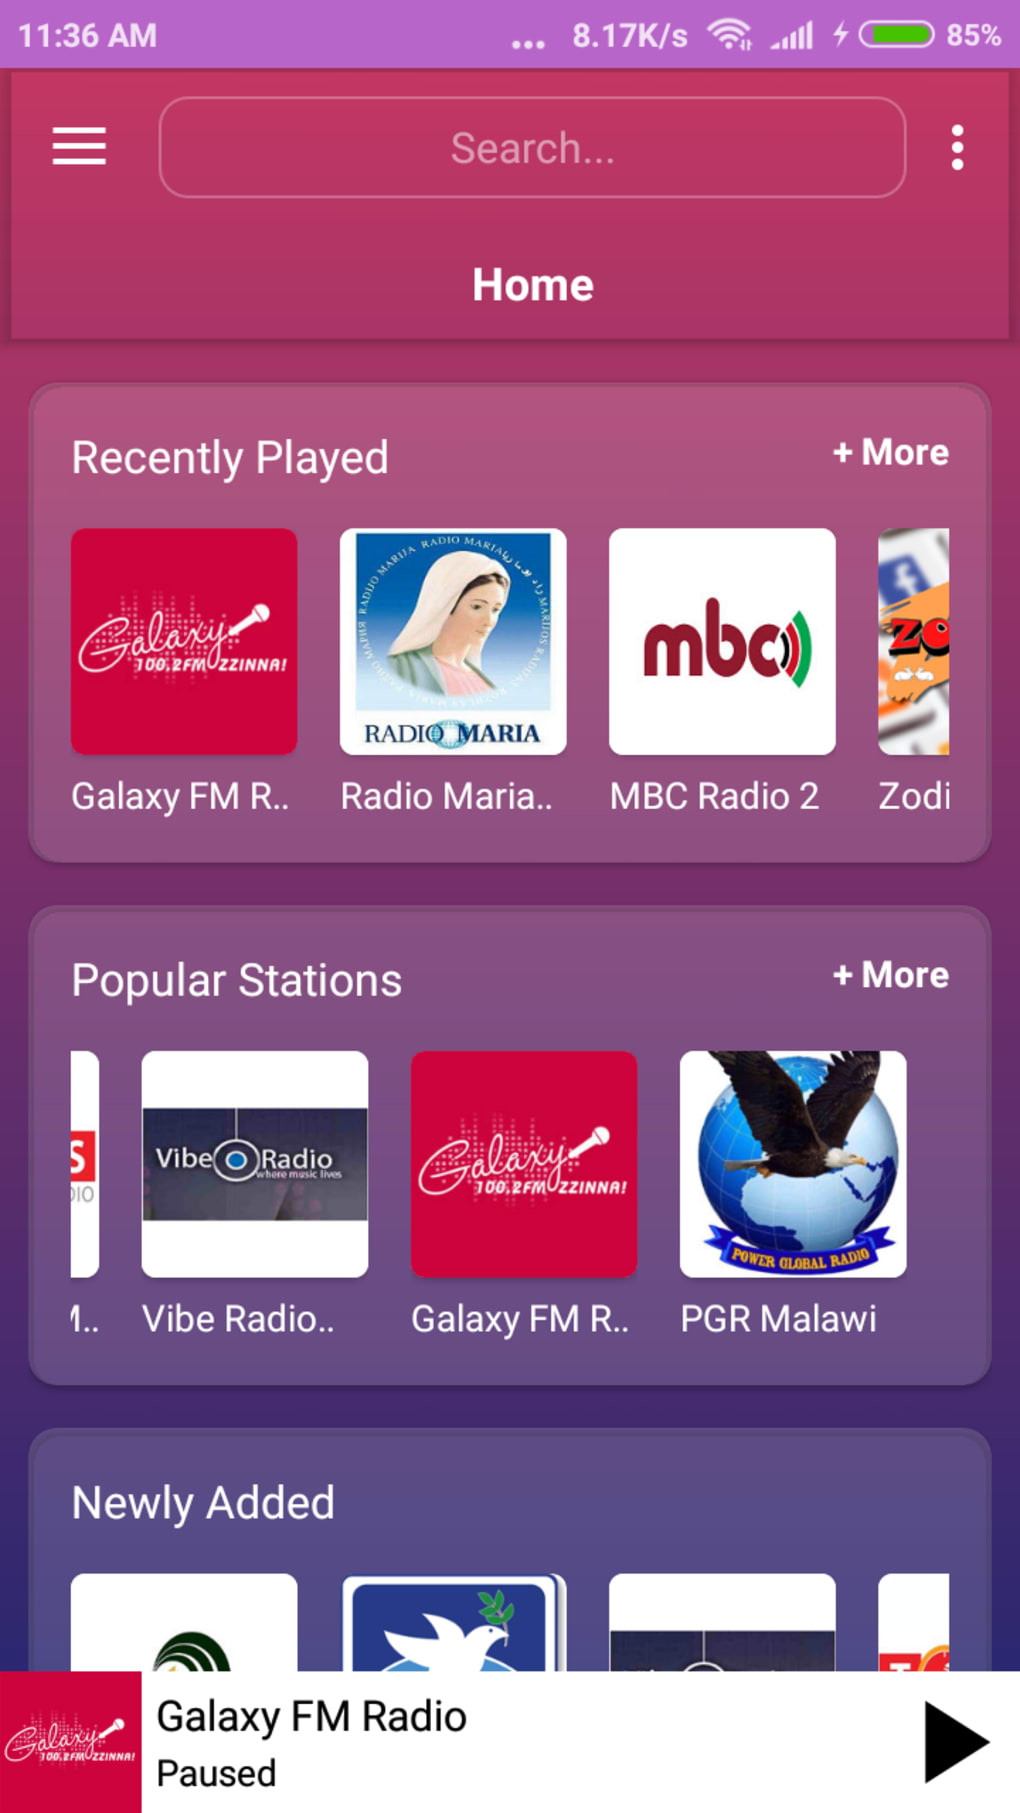 Vibes FM APK for Android Download